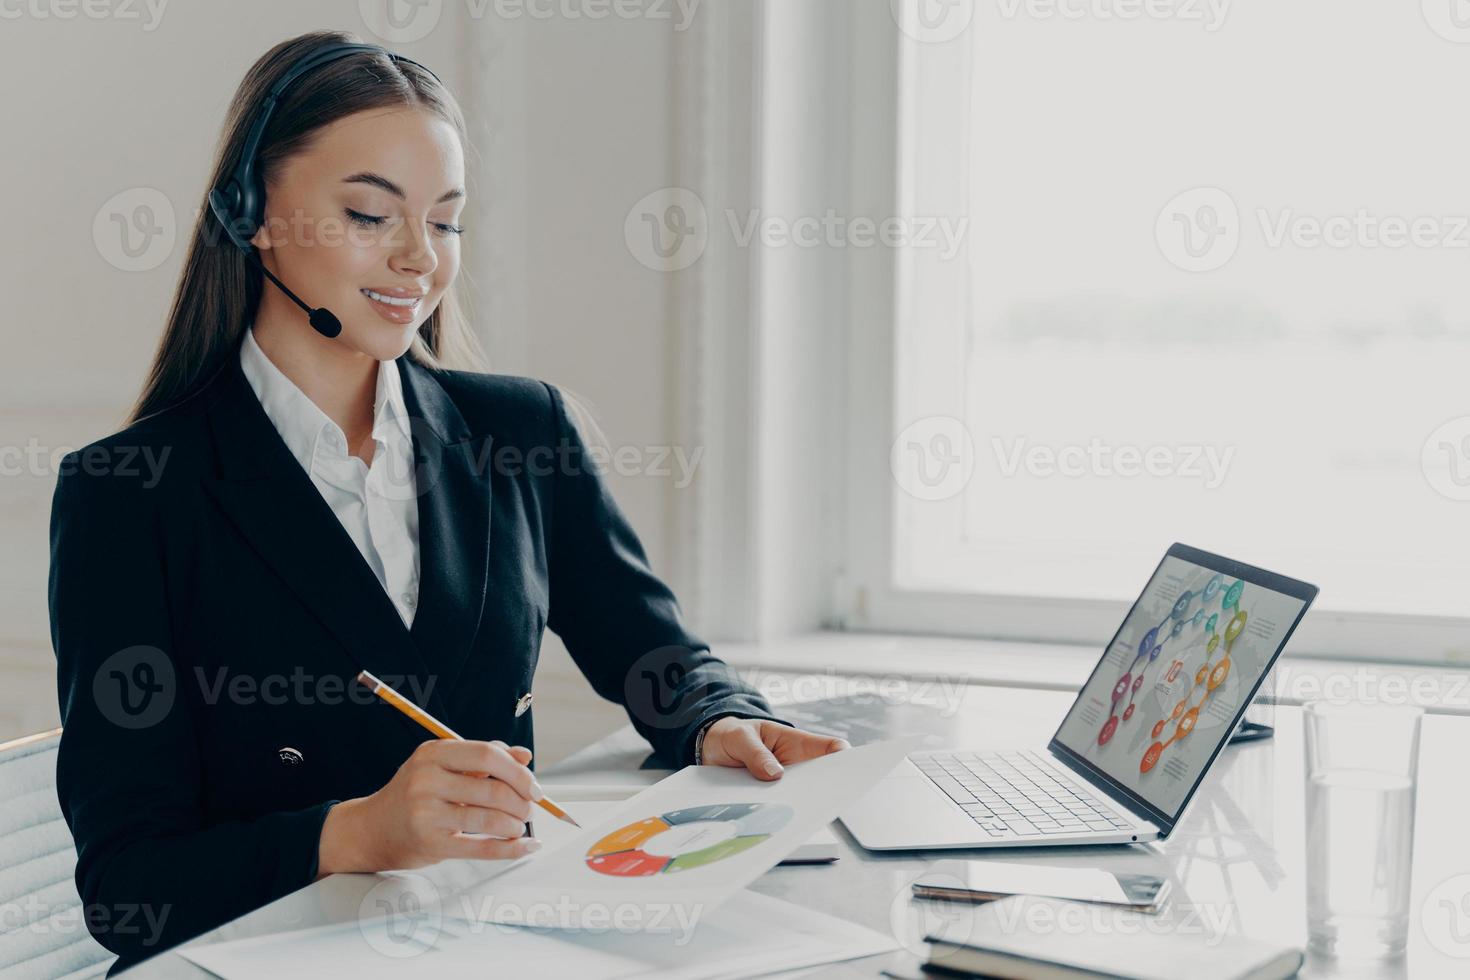 Satisfied female entrepreneur in headset analyzing project results during web conference photo